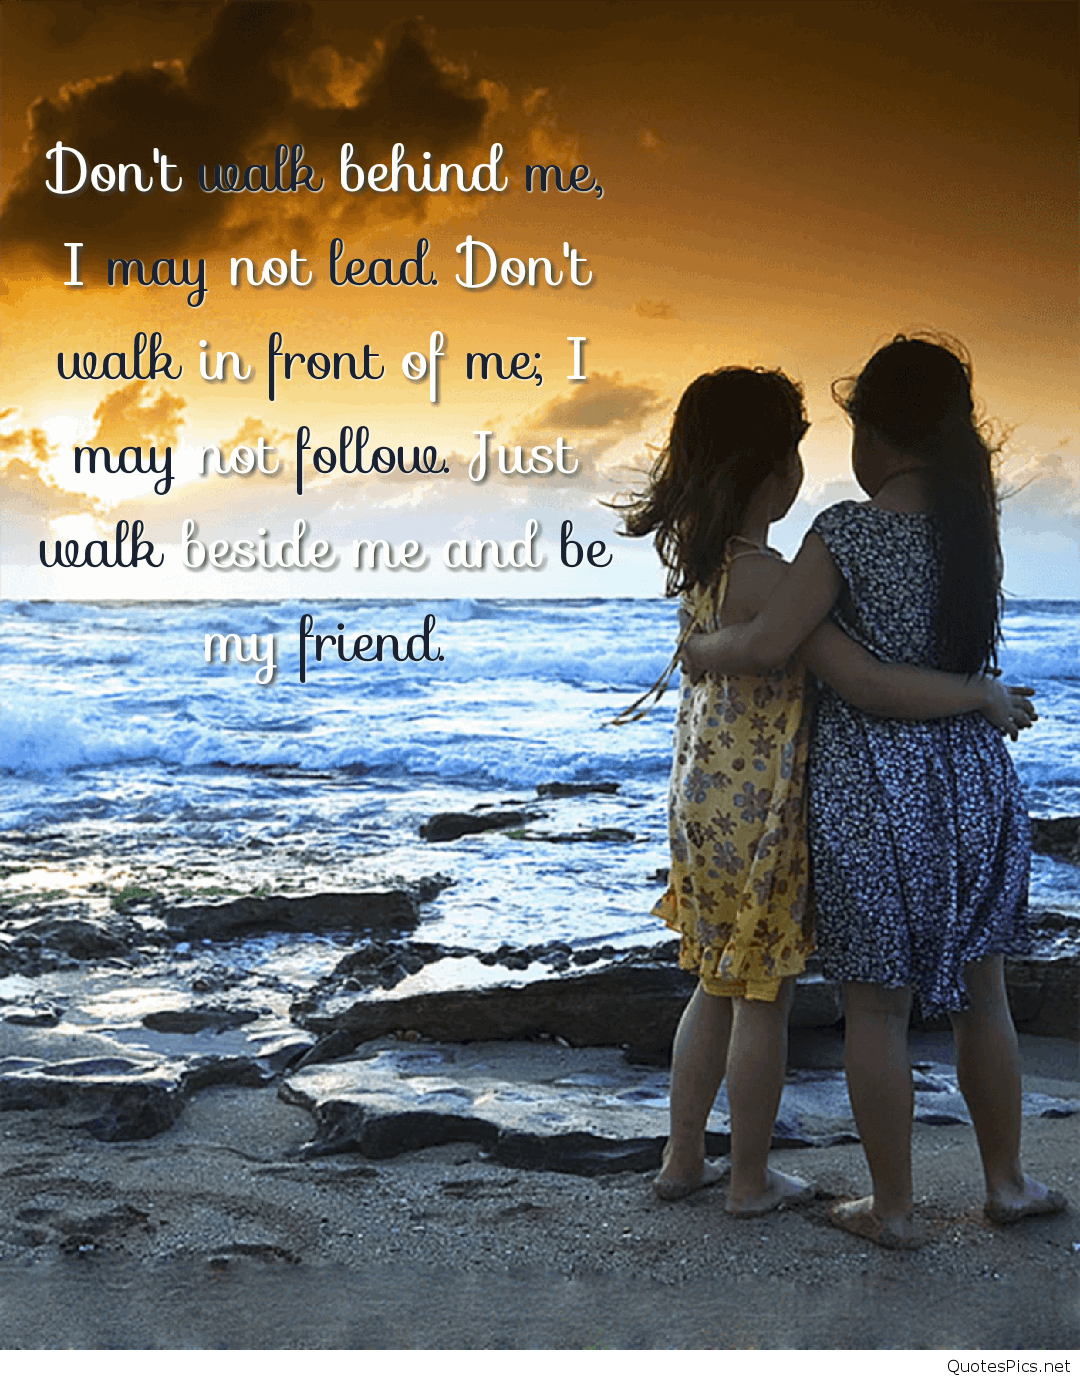 Quotes Wallpapers Wallpaper Cave Miss you dear friend is with preeti behl a...